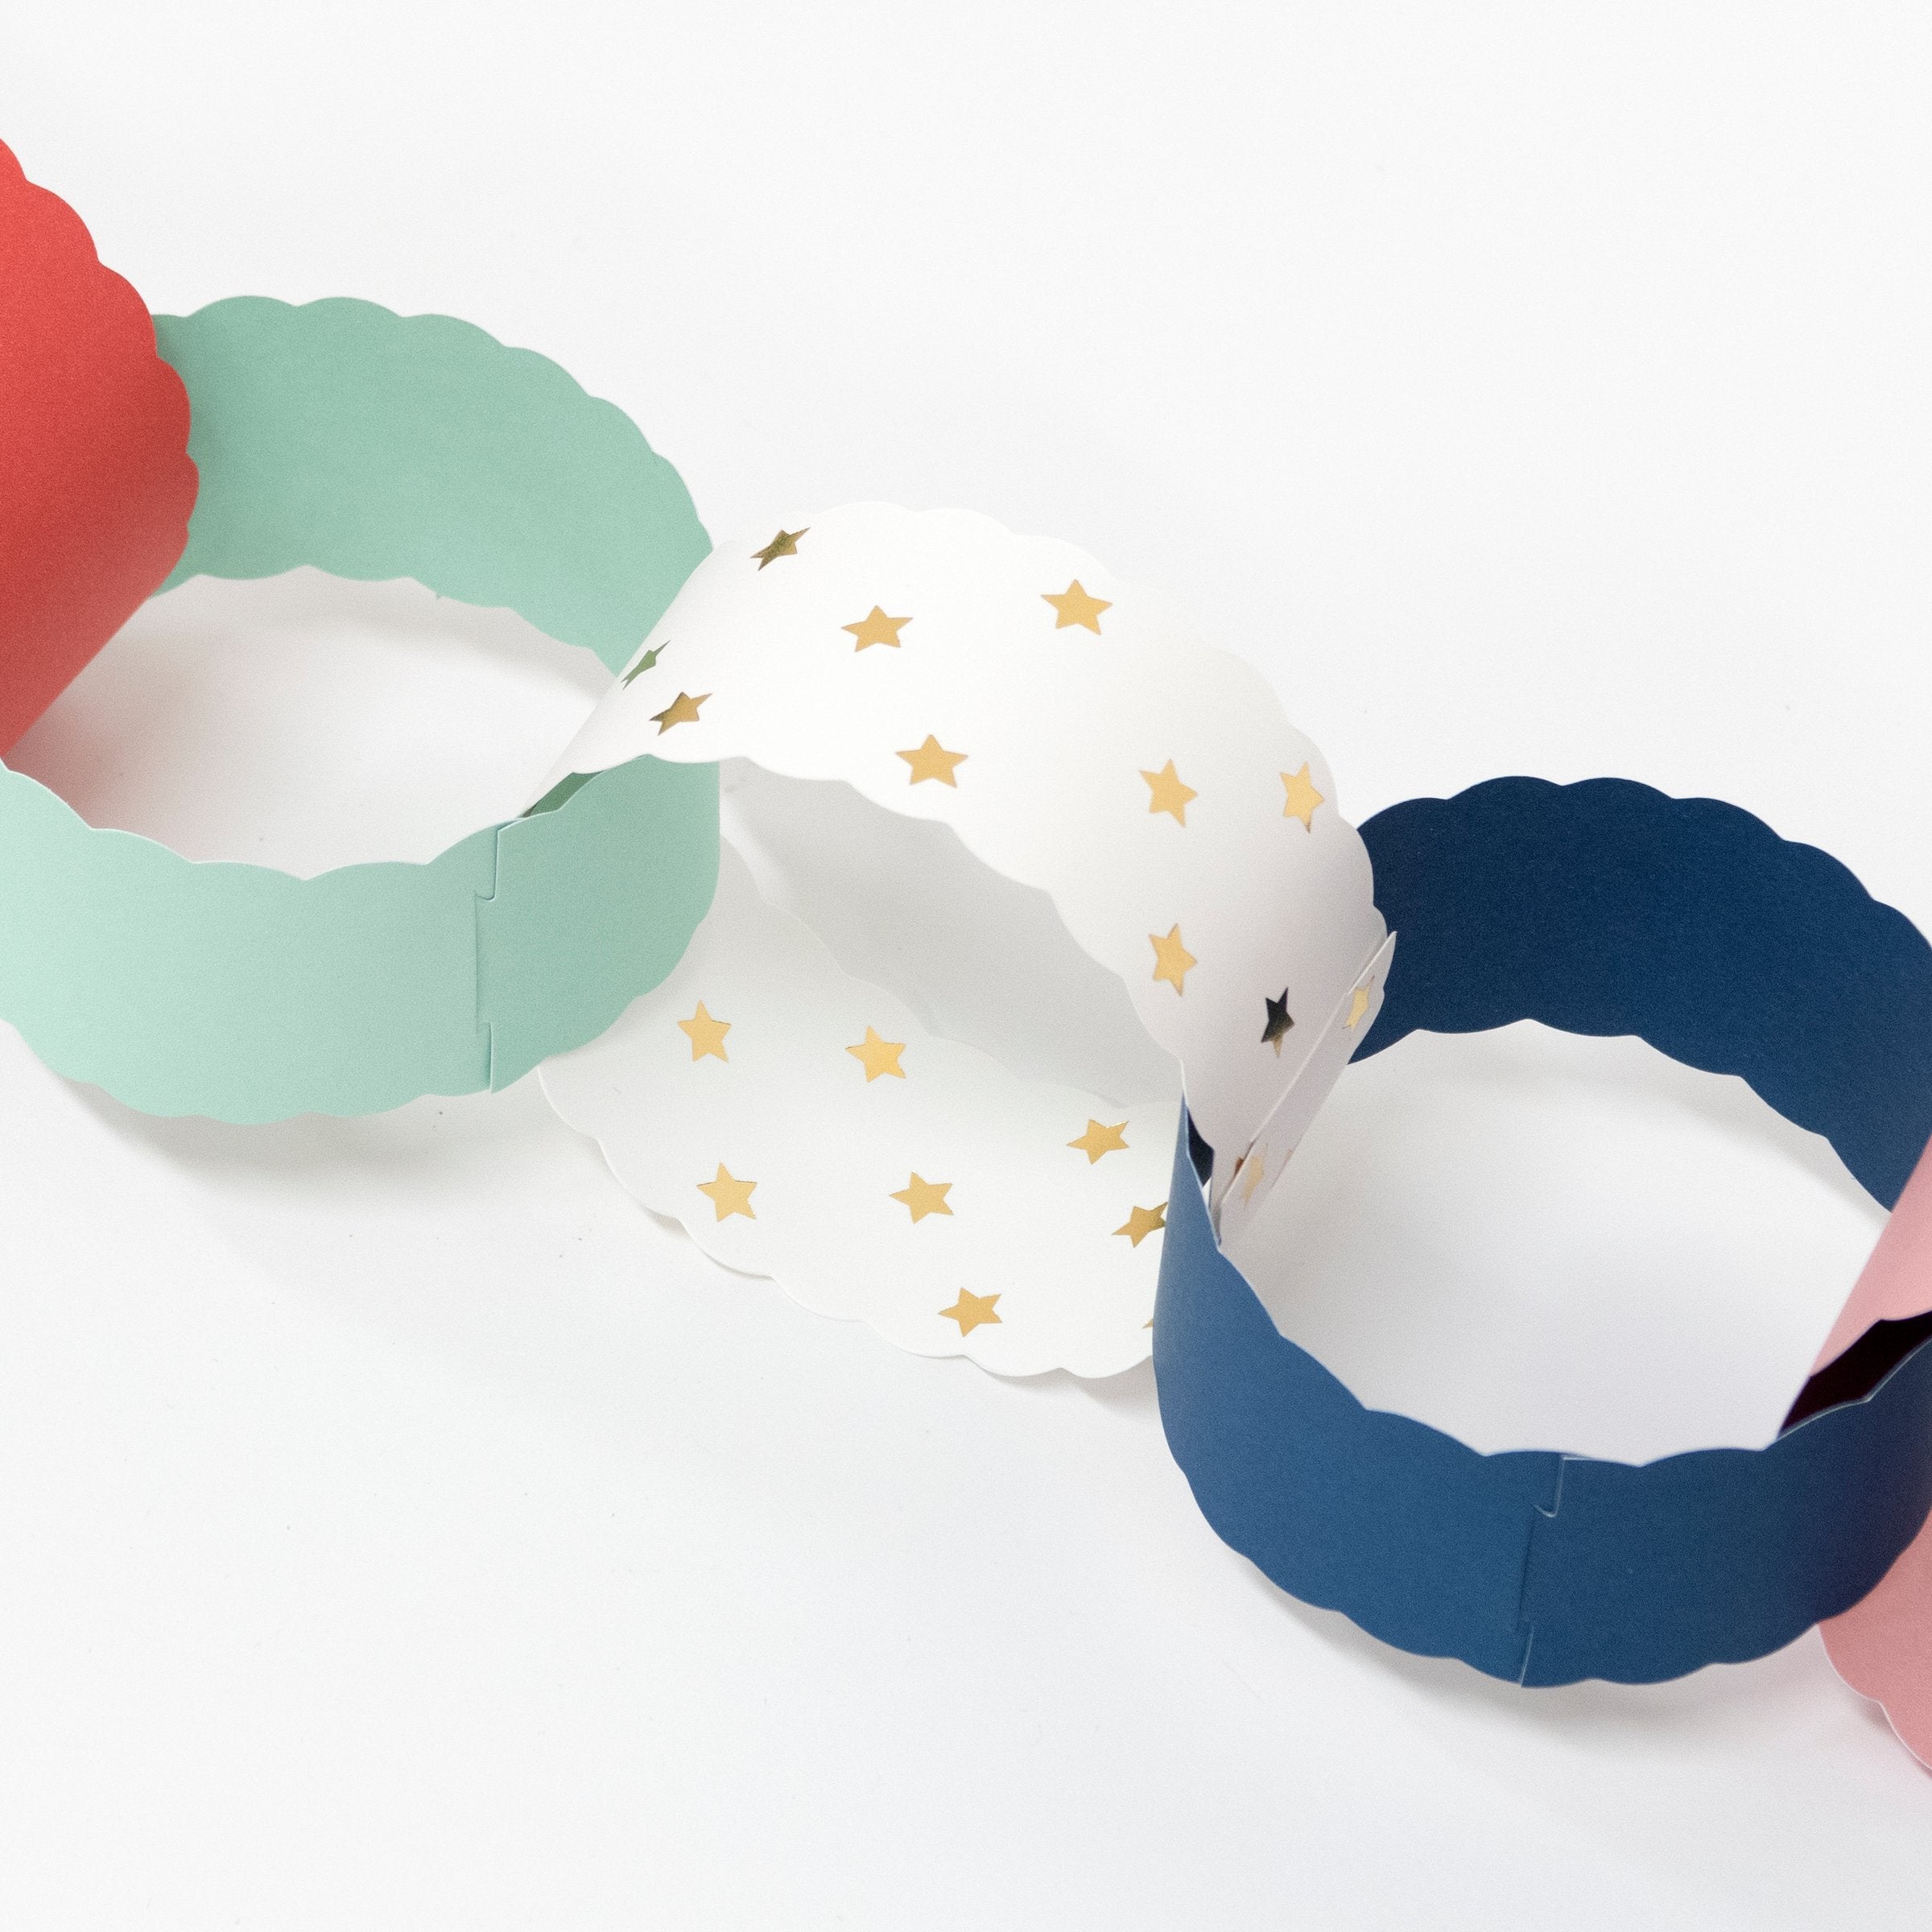 Our colourful paper chains have a stylish scalloped edge.